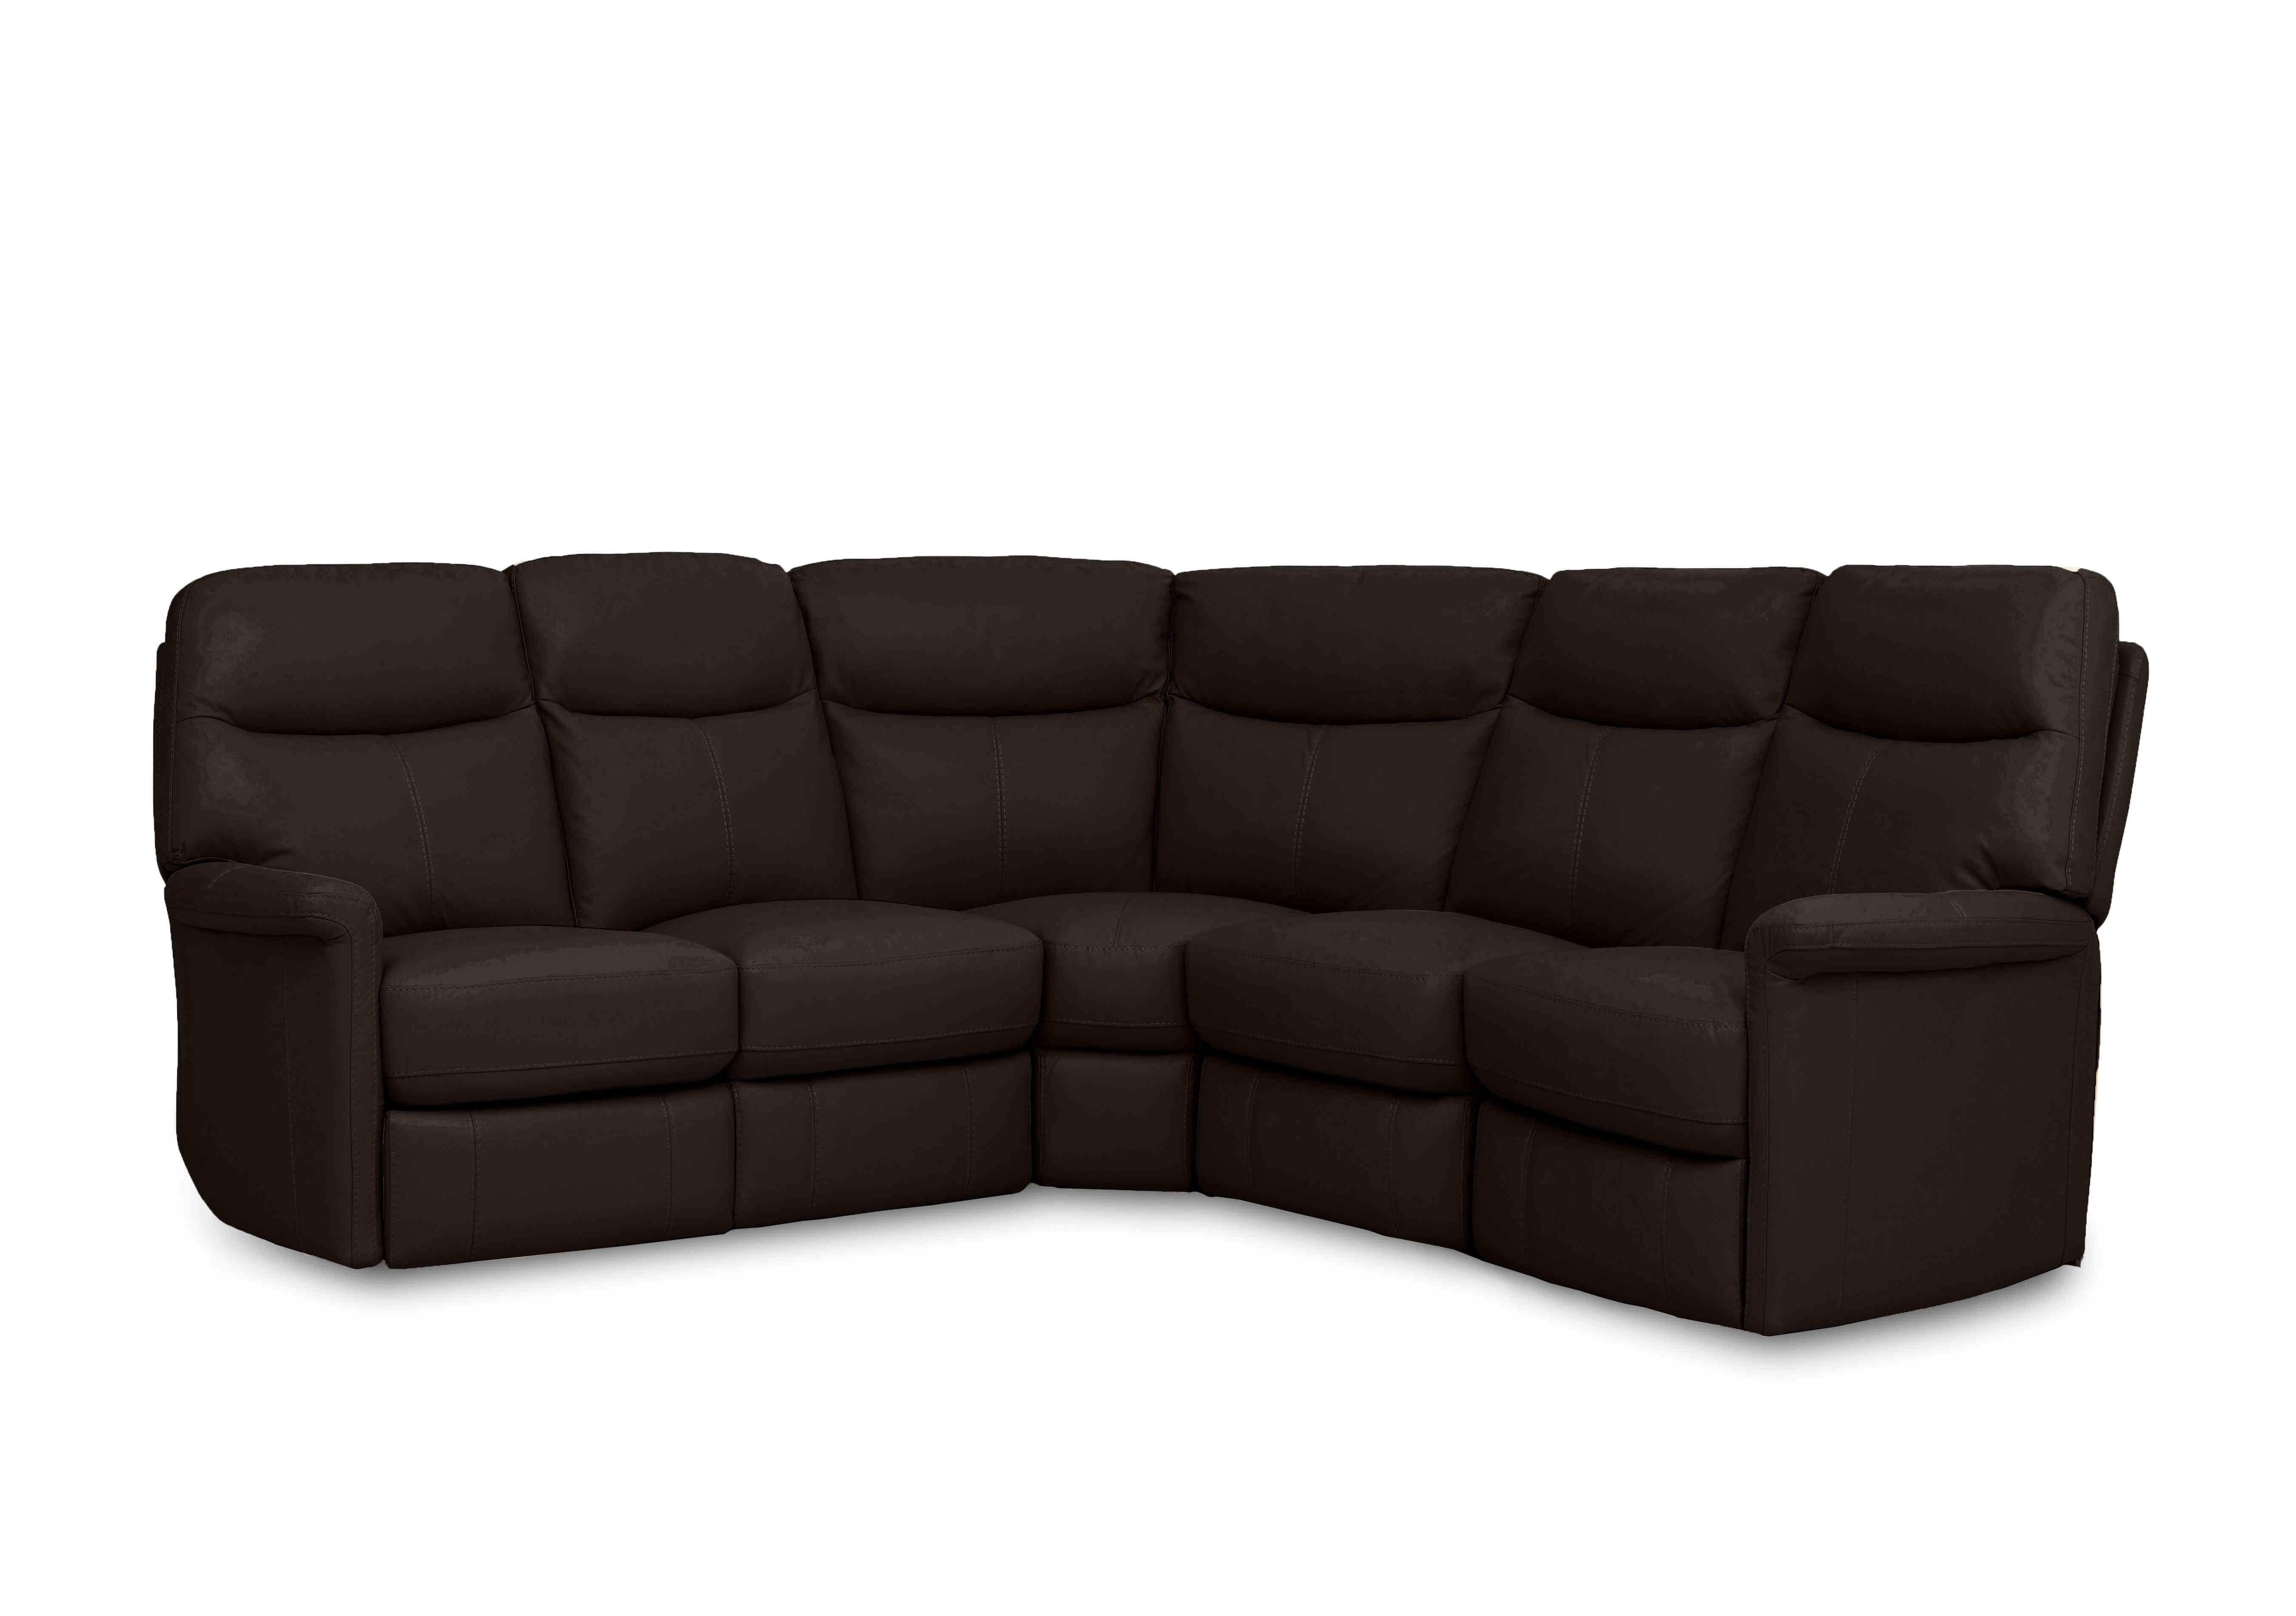 Compact Collection Lille Large Leather Corner Sofa in Bv-1748 Dark Chocolate on Furniture Village